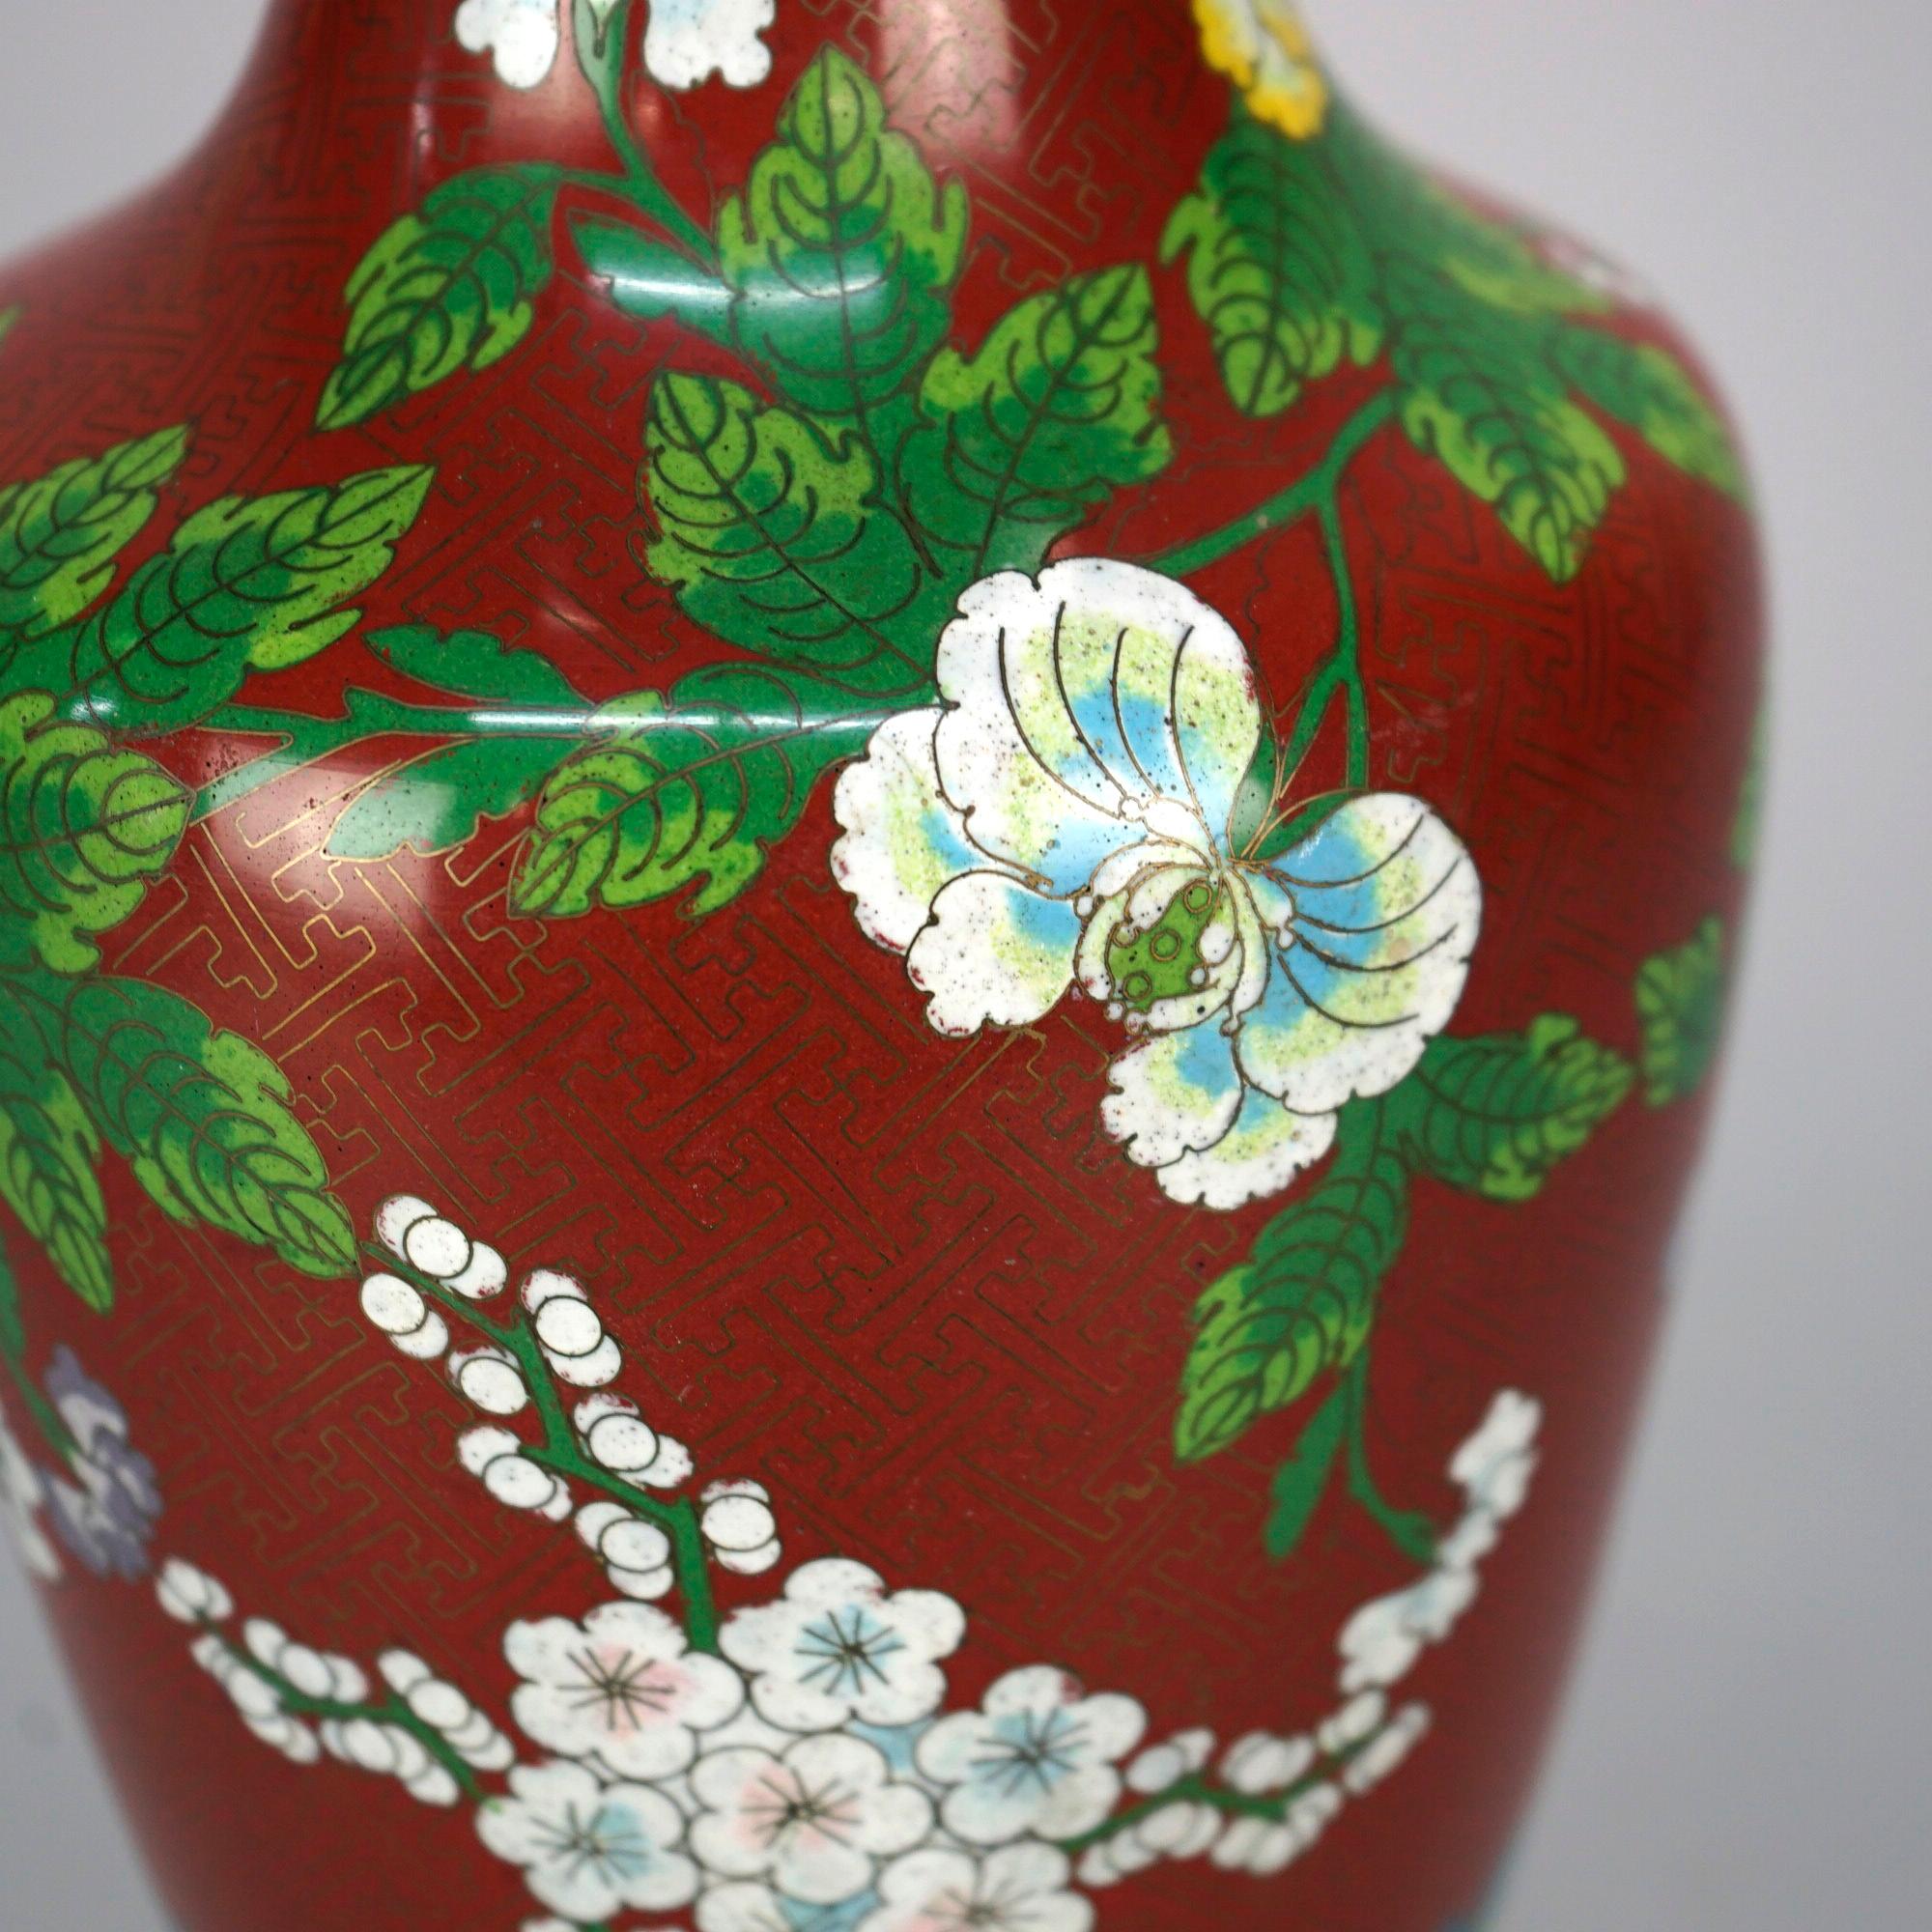 Antique Chinese Cloissone Enameled Vase with Bronze Base, Garden Themed, c1900 For Sale 3